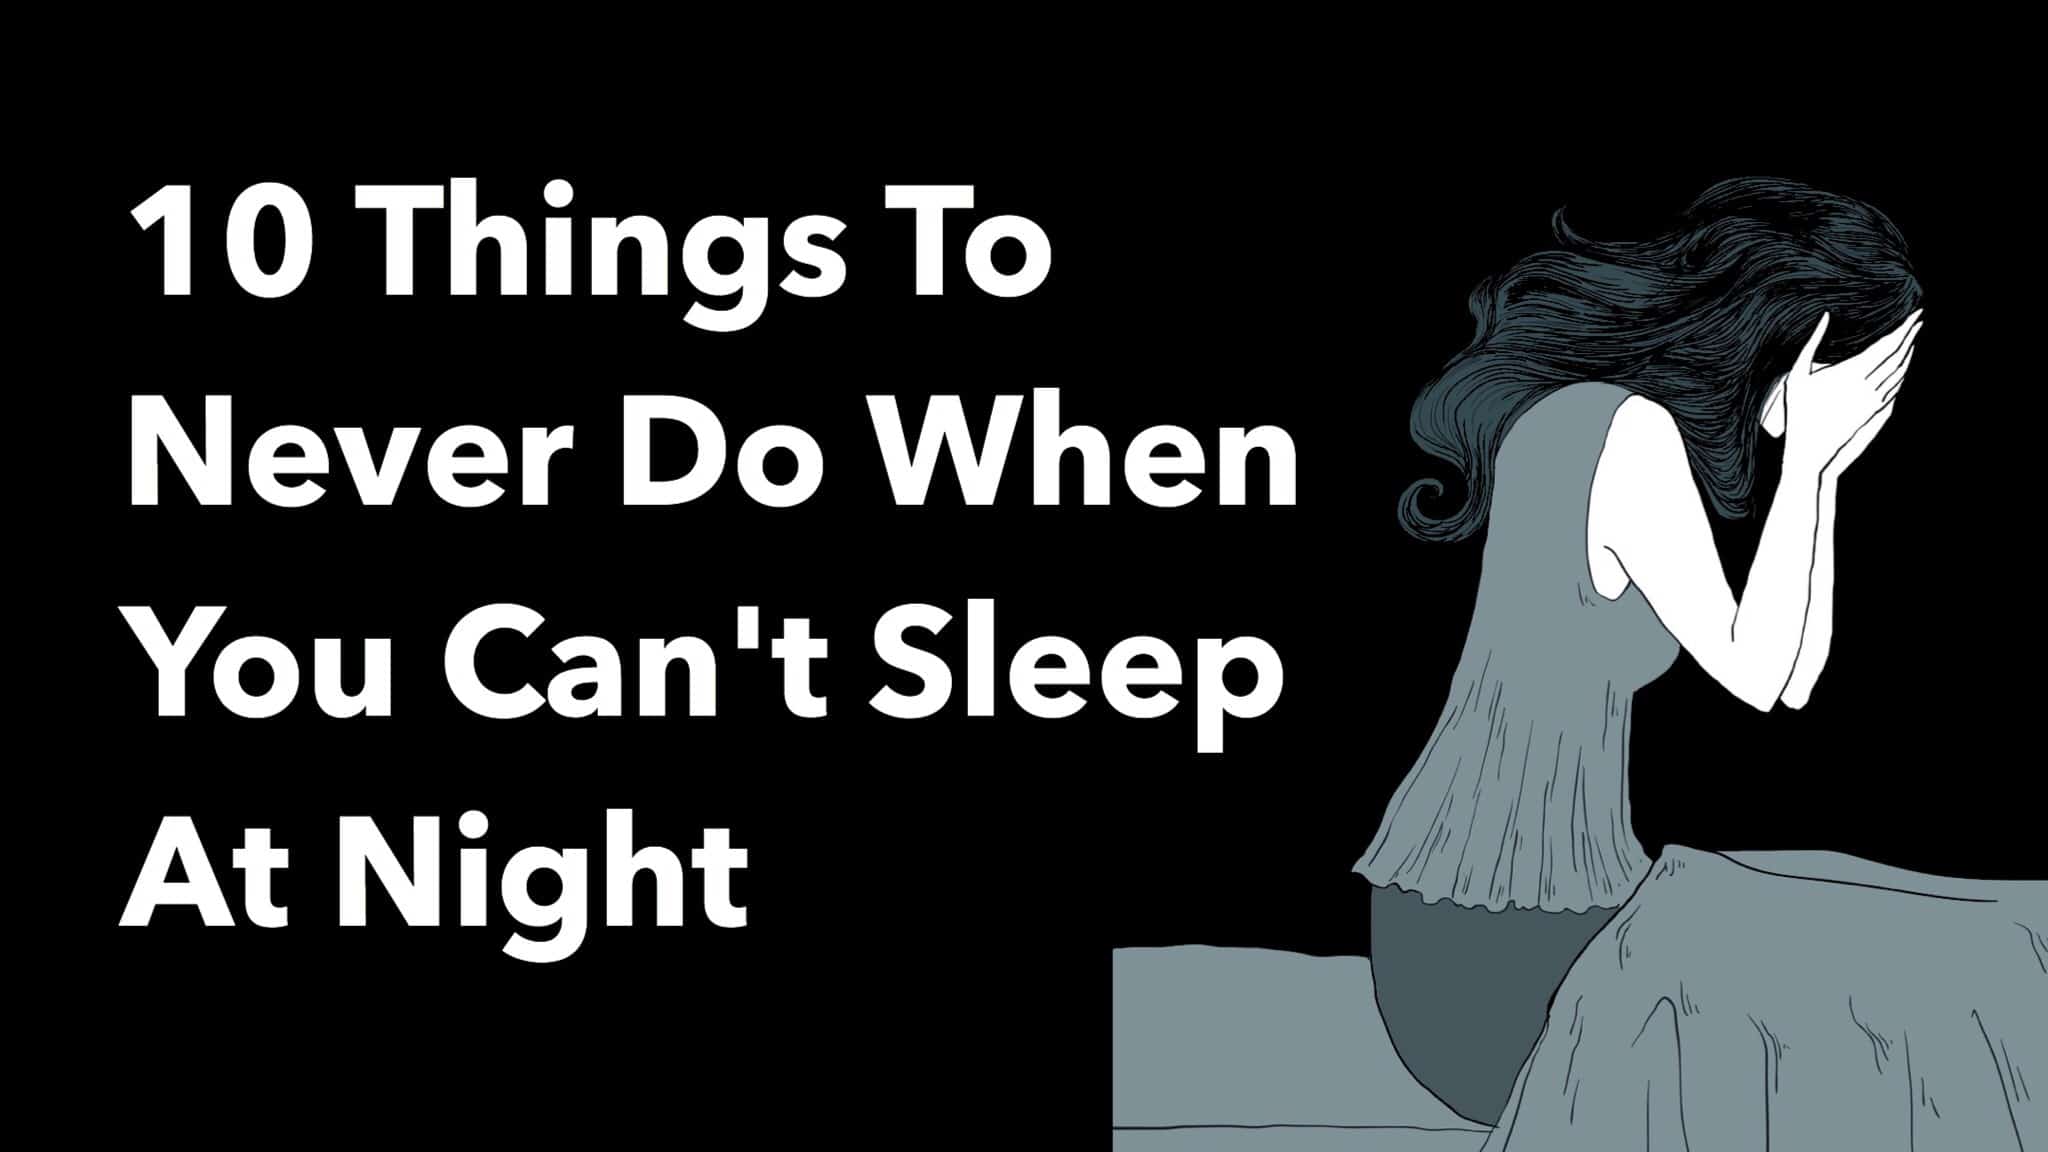 10 Things To Never Do When You Cant Sleep At Night